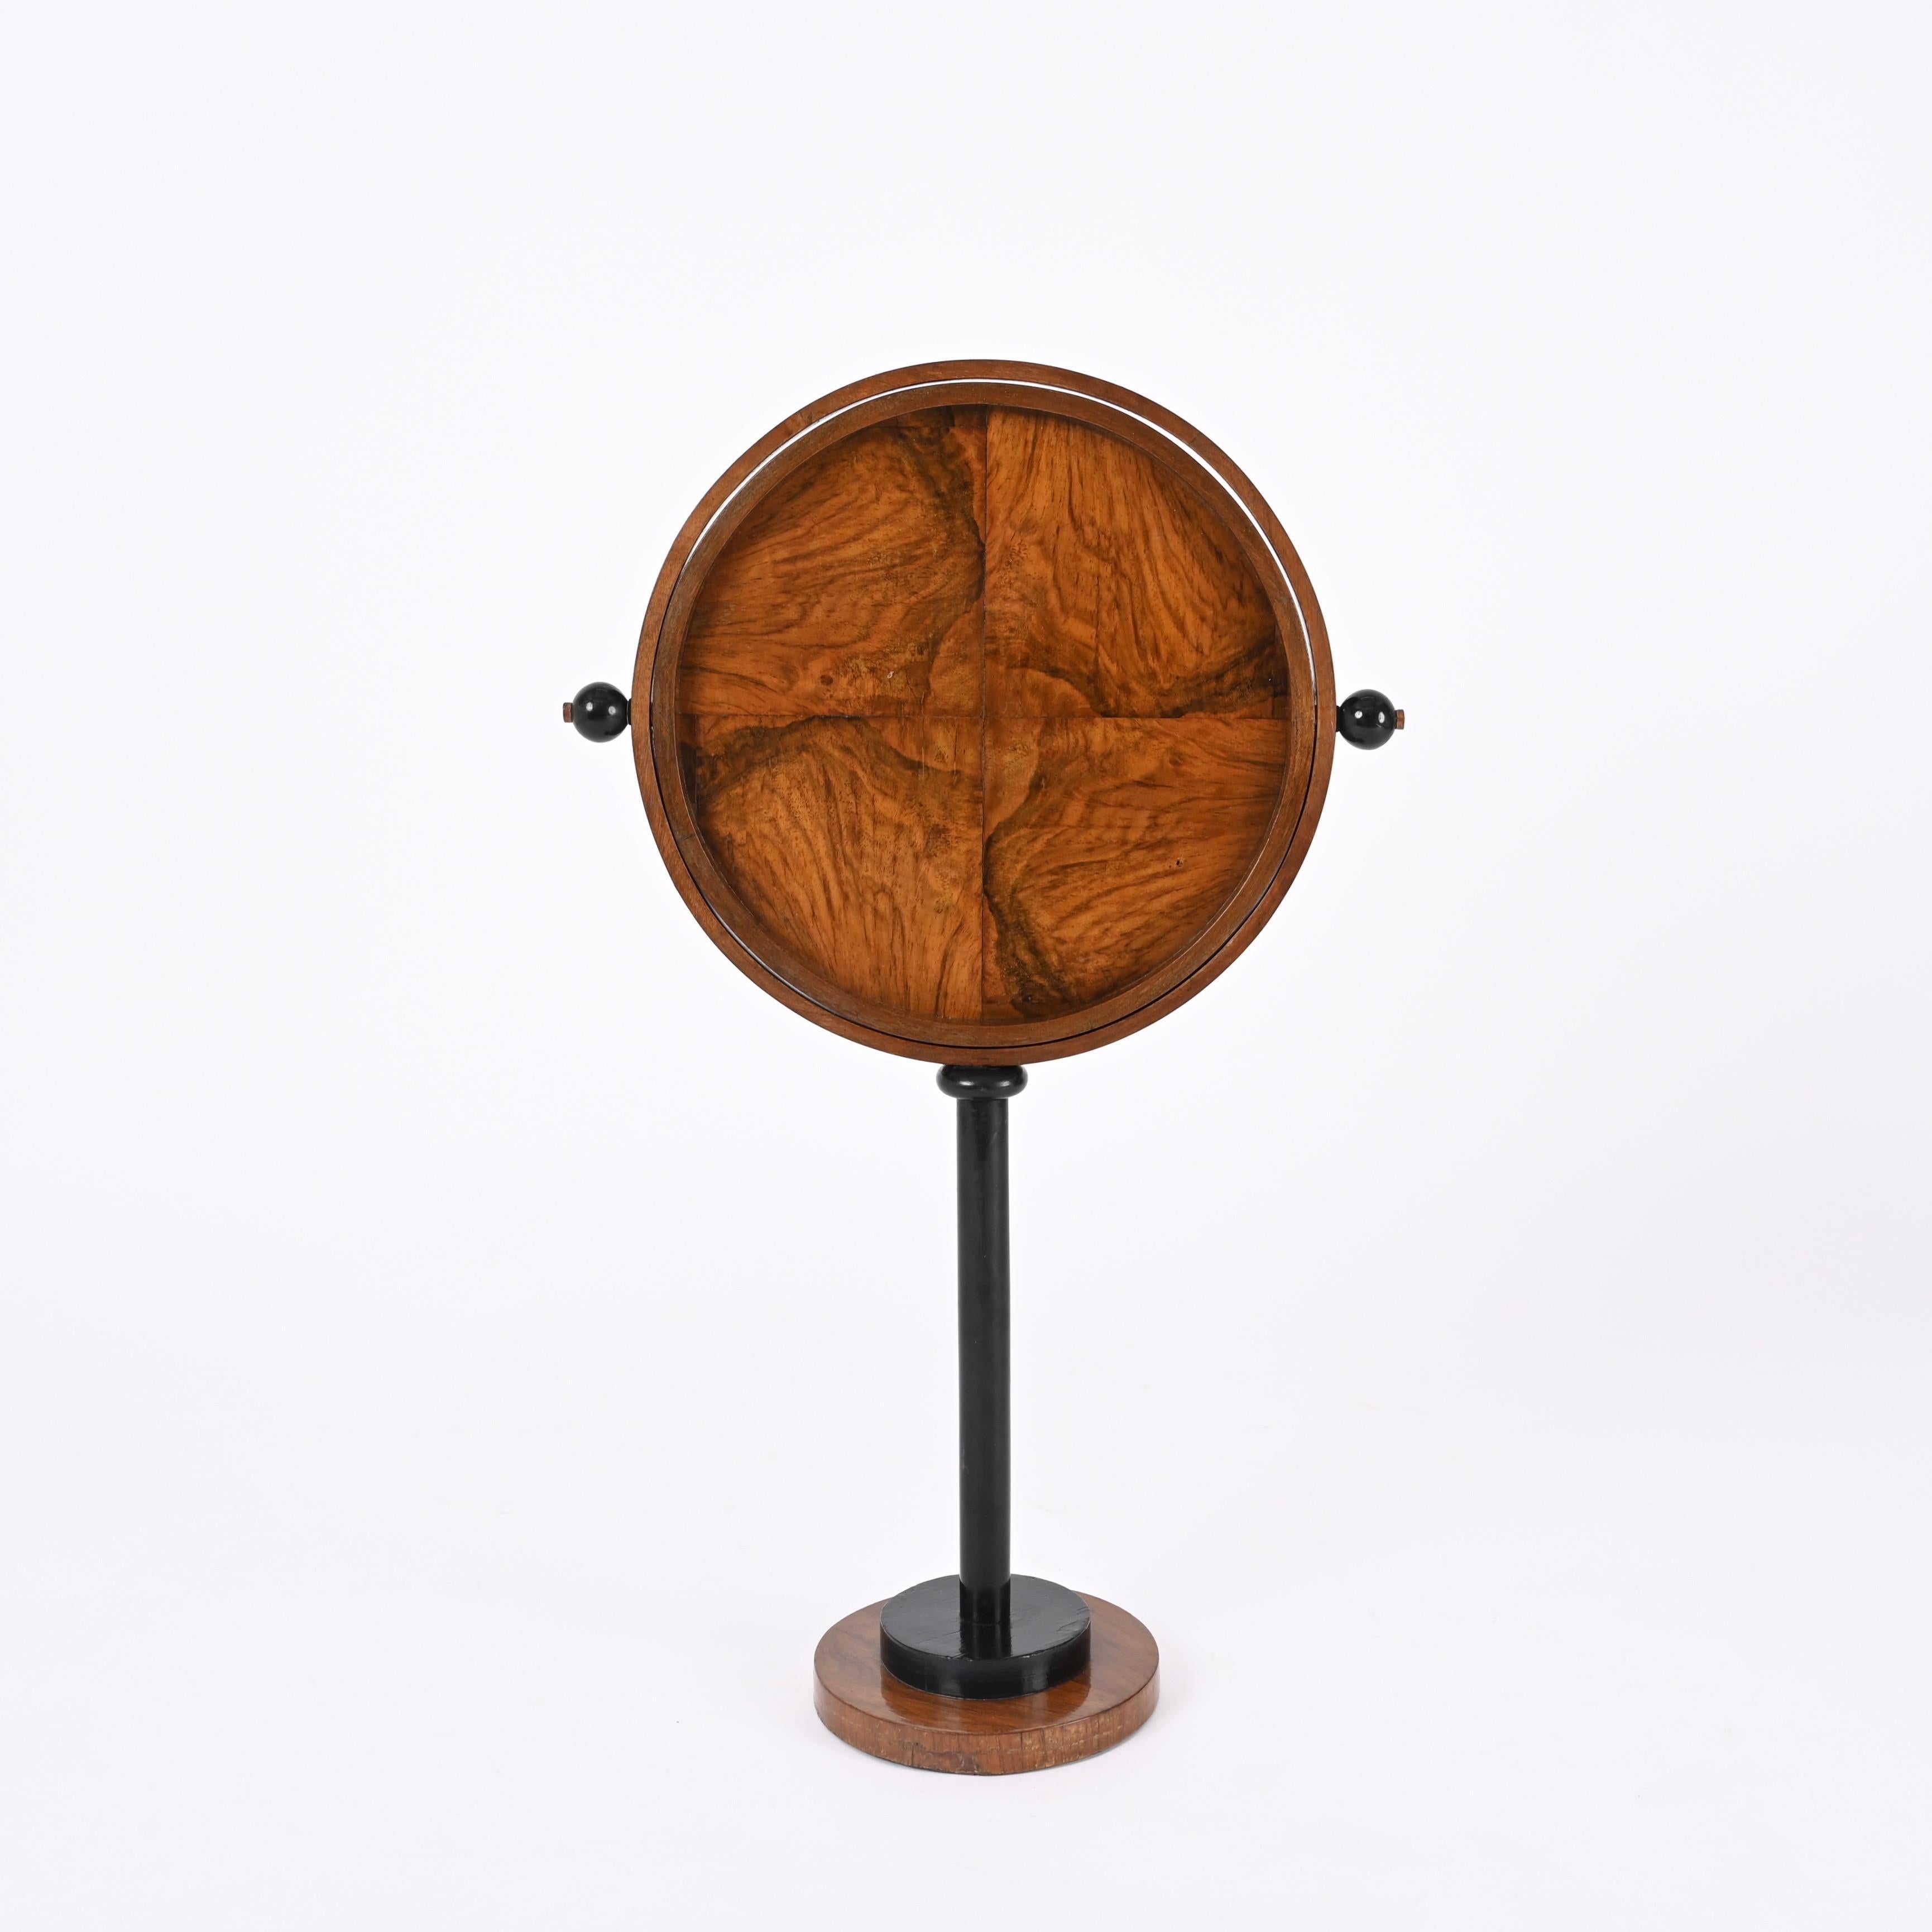 Hand-Crafted Art Deco Tilting Round Side Table in Olive Burl and Walnut, Italy 1930s For Sale